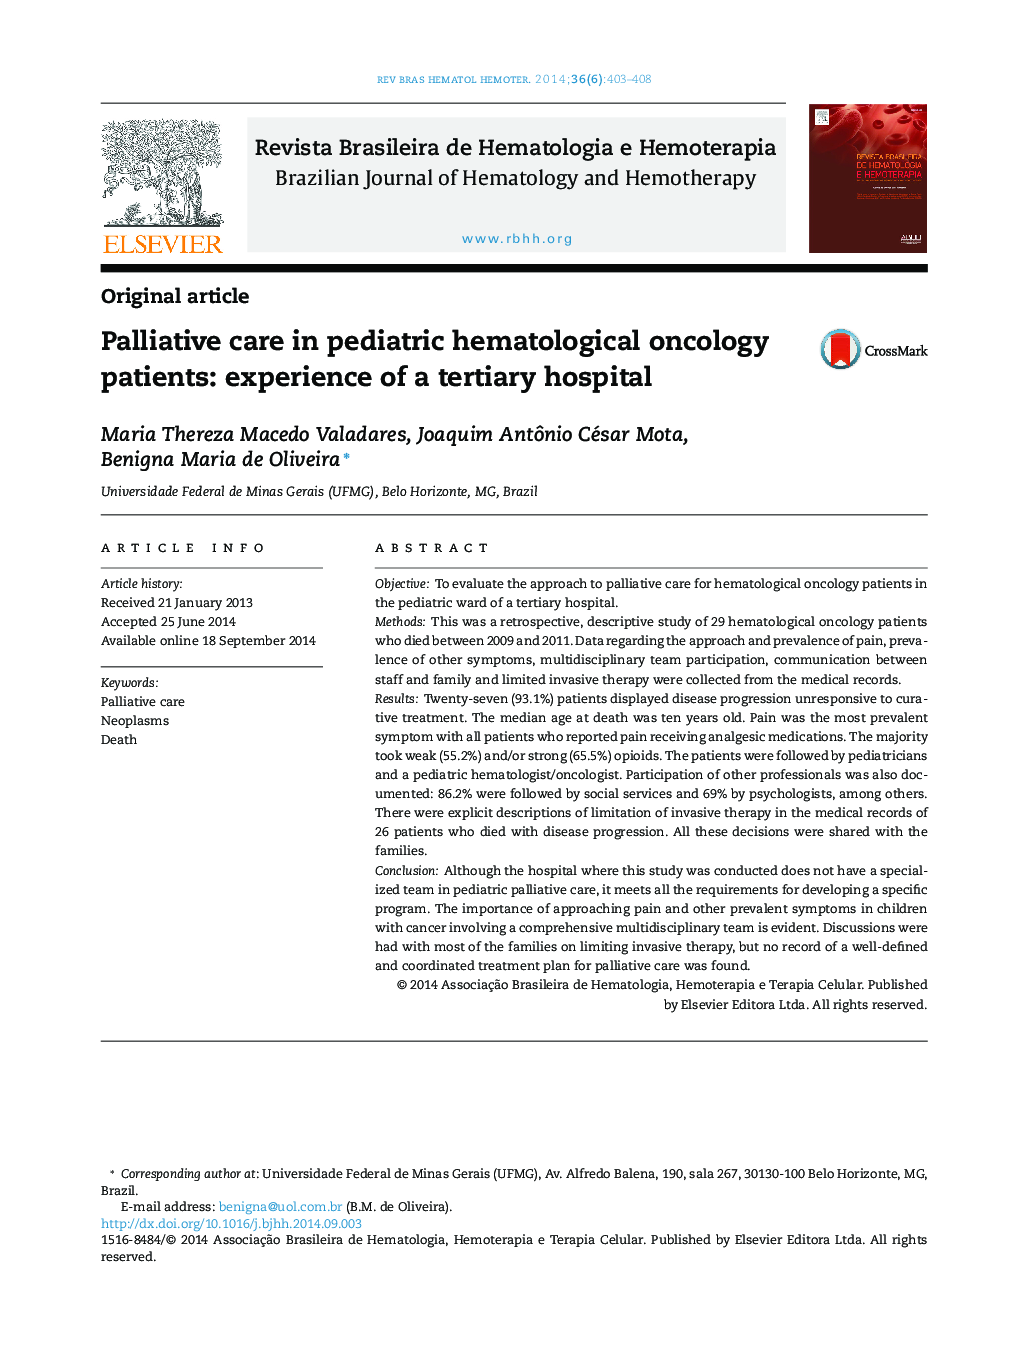 Palliative care in pediatric hematological oncology patients: experience of a tertiary hospital